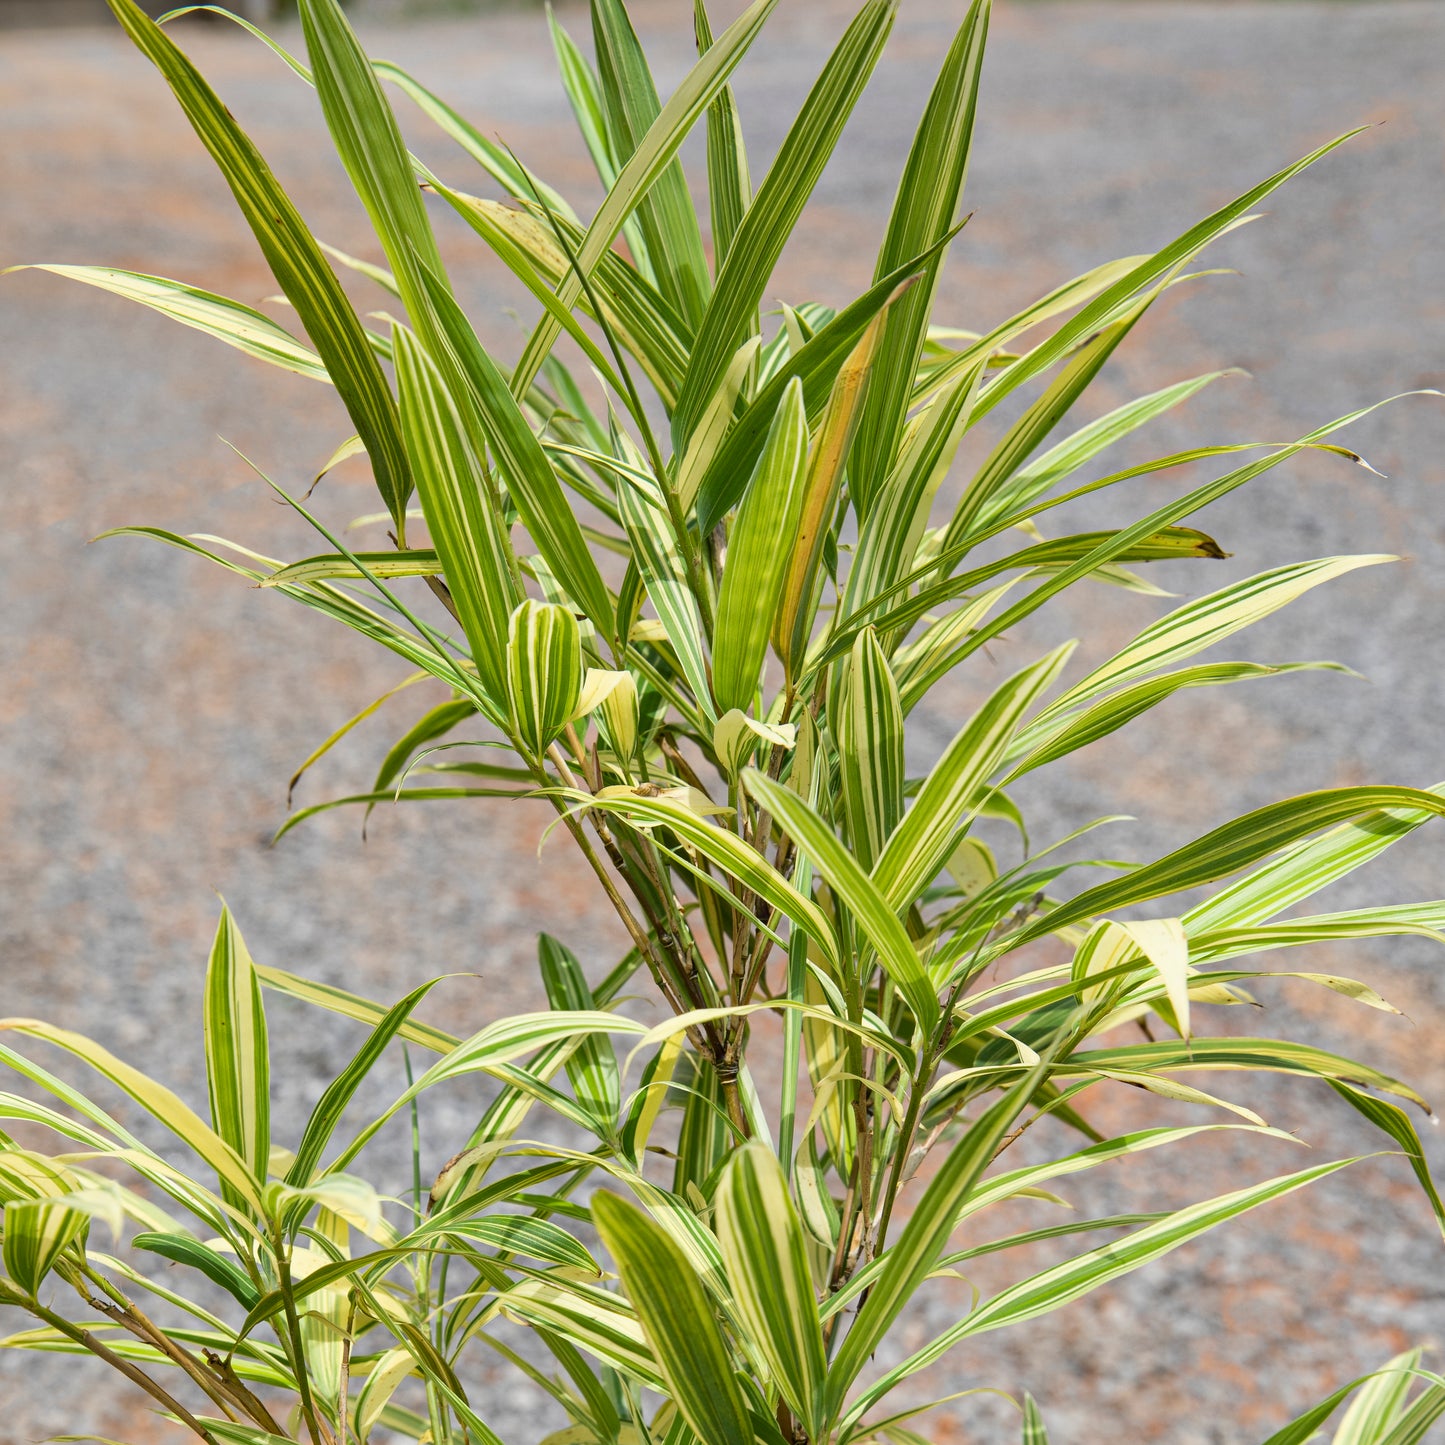 Upclose image of Albostriata. Green foliage with light yellow variegation. 